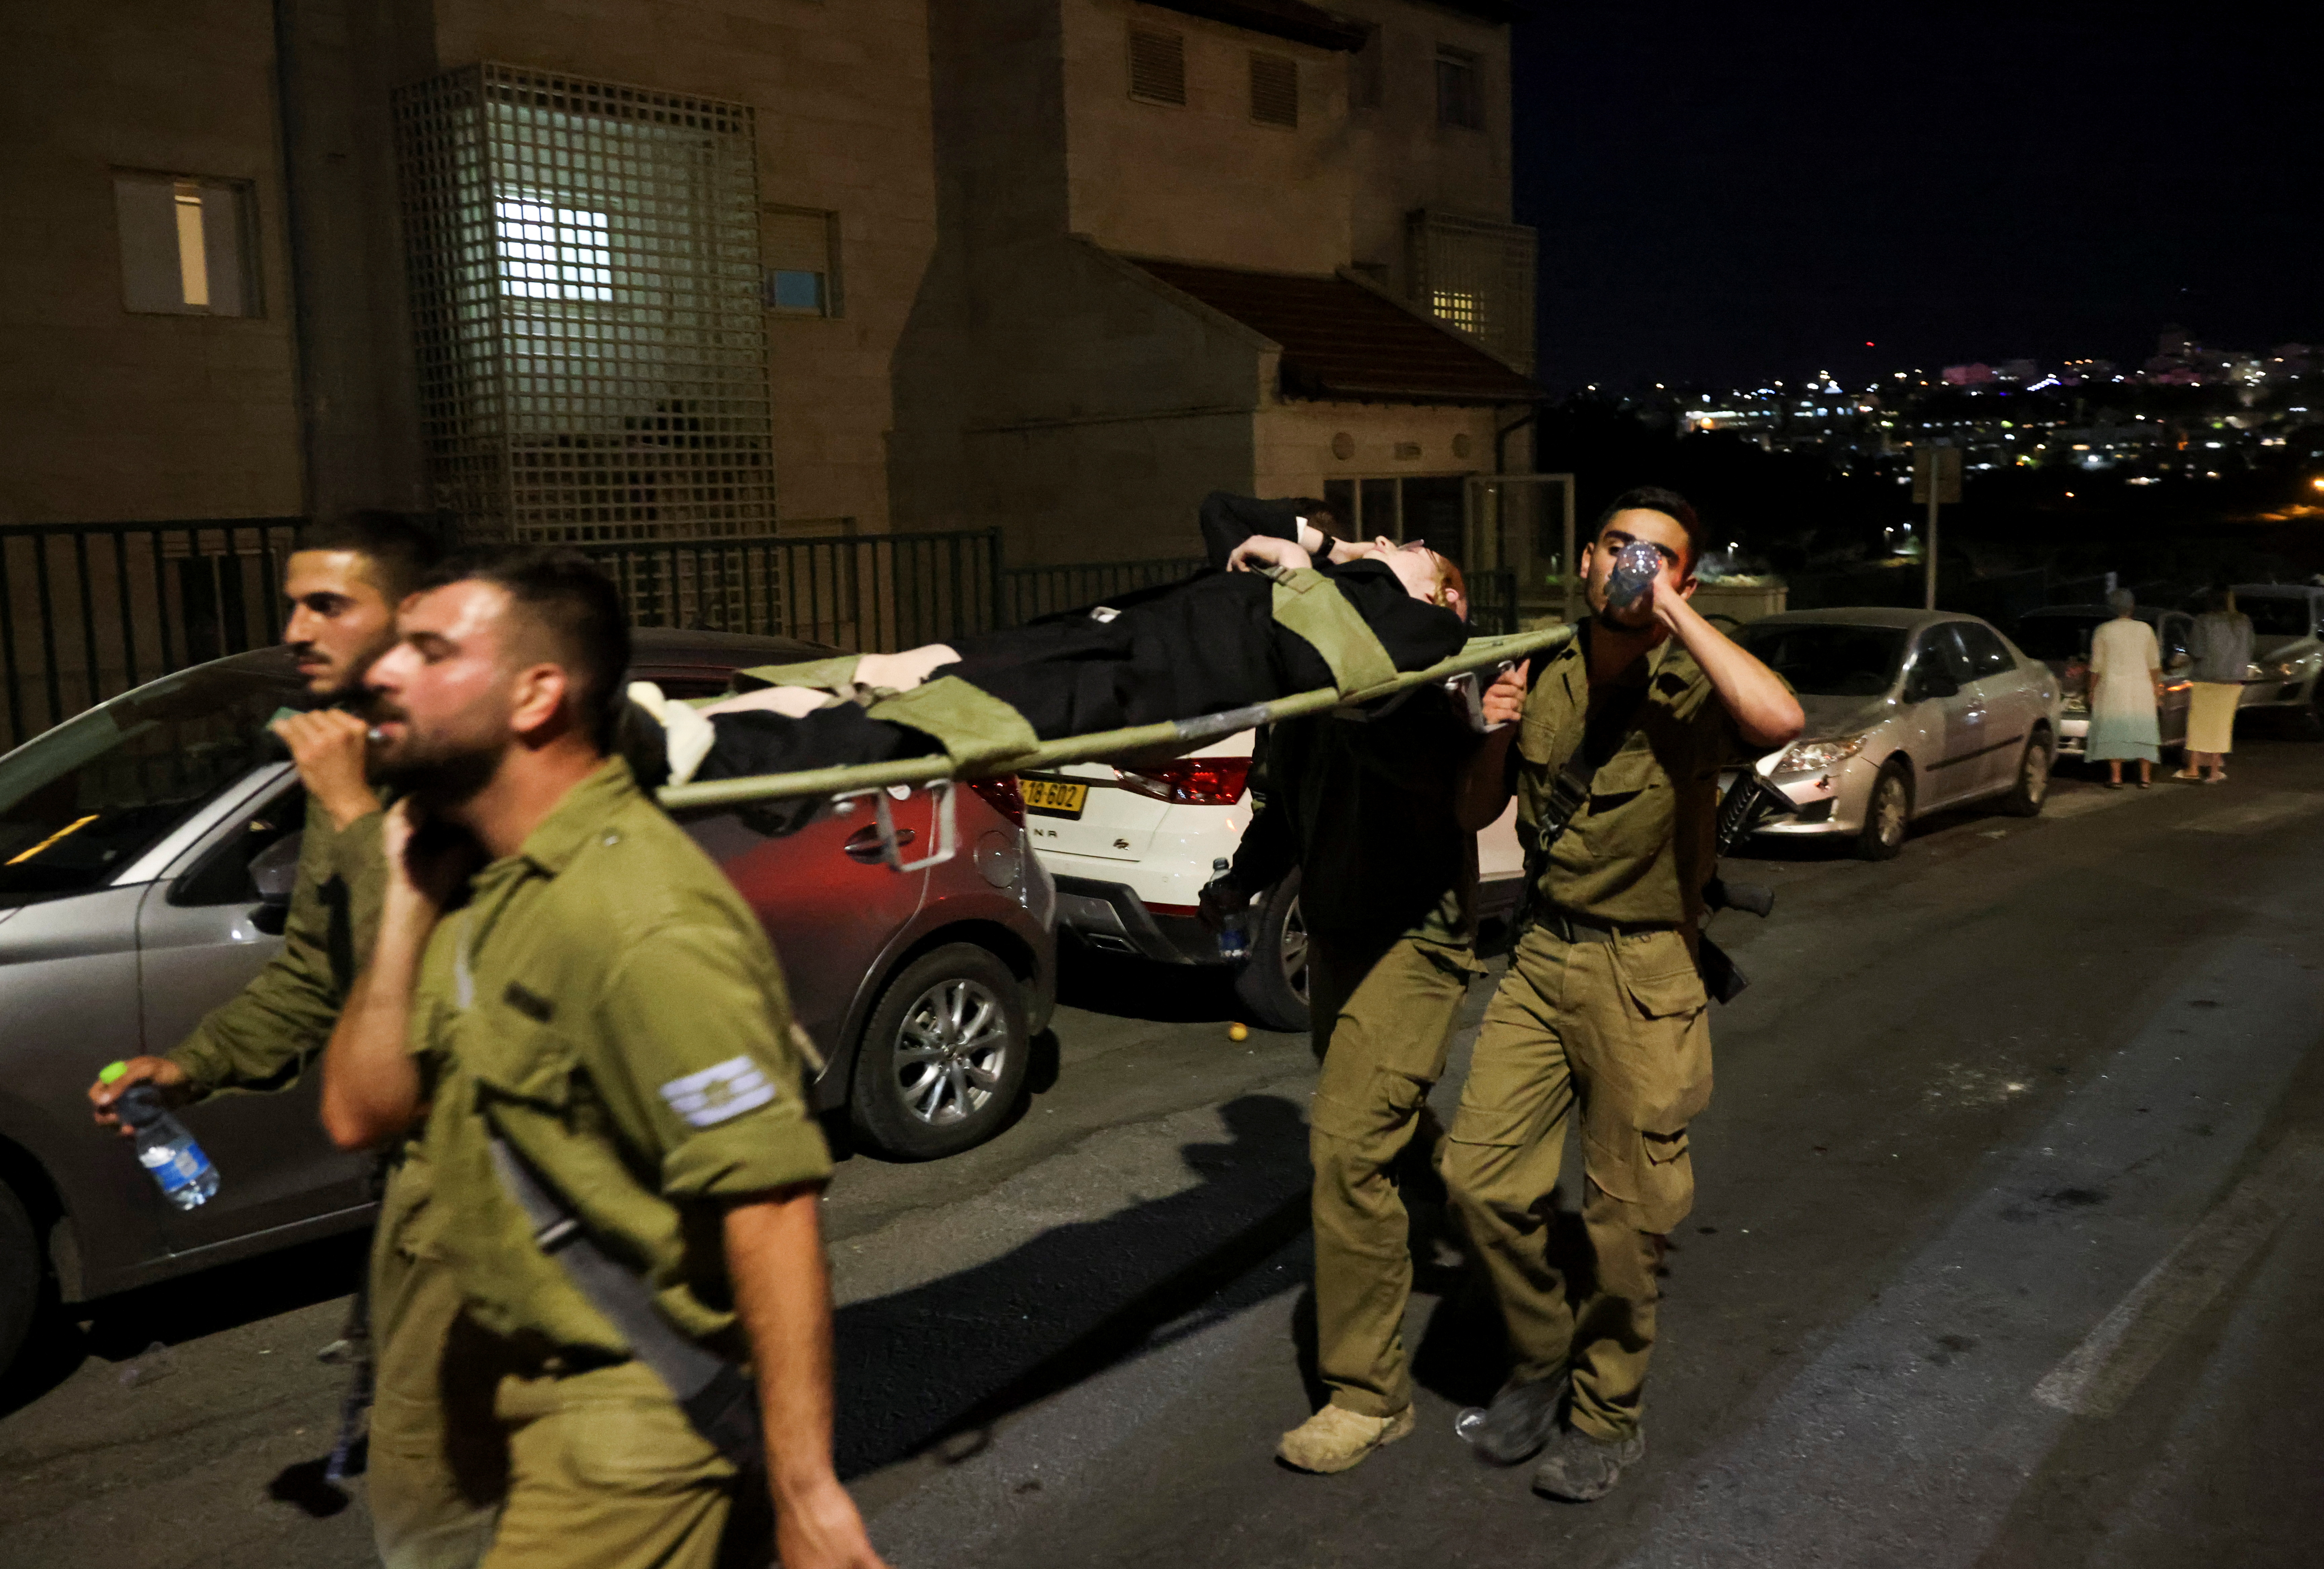 Members of the military carry an injured man outside a synagogue where a grandstand collapsed during a religious celebration in Givat Zeev, in the occupied West Bank, May 16, 2021. REUTERS/Ronen Zvulun